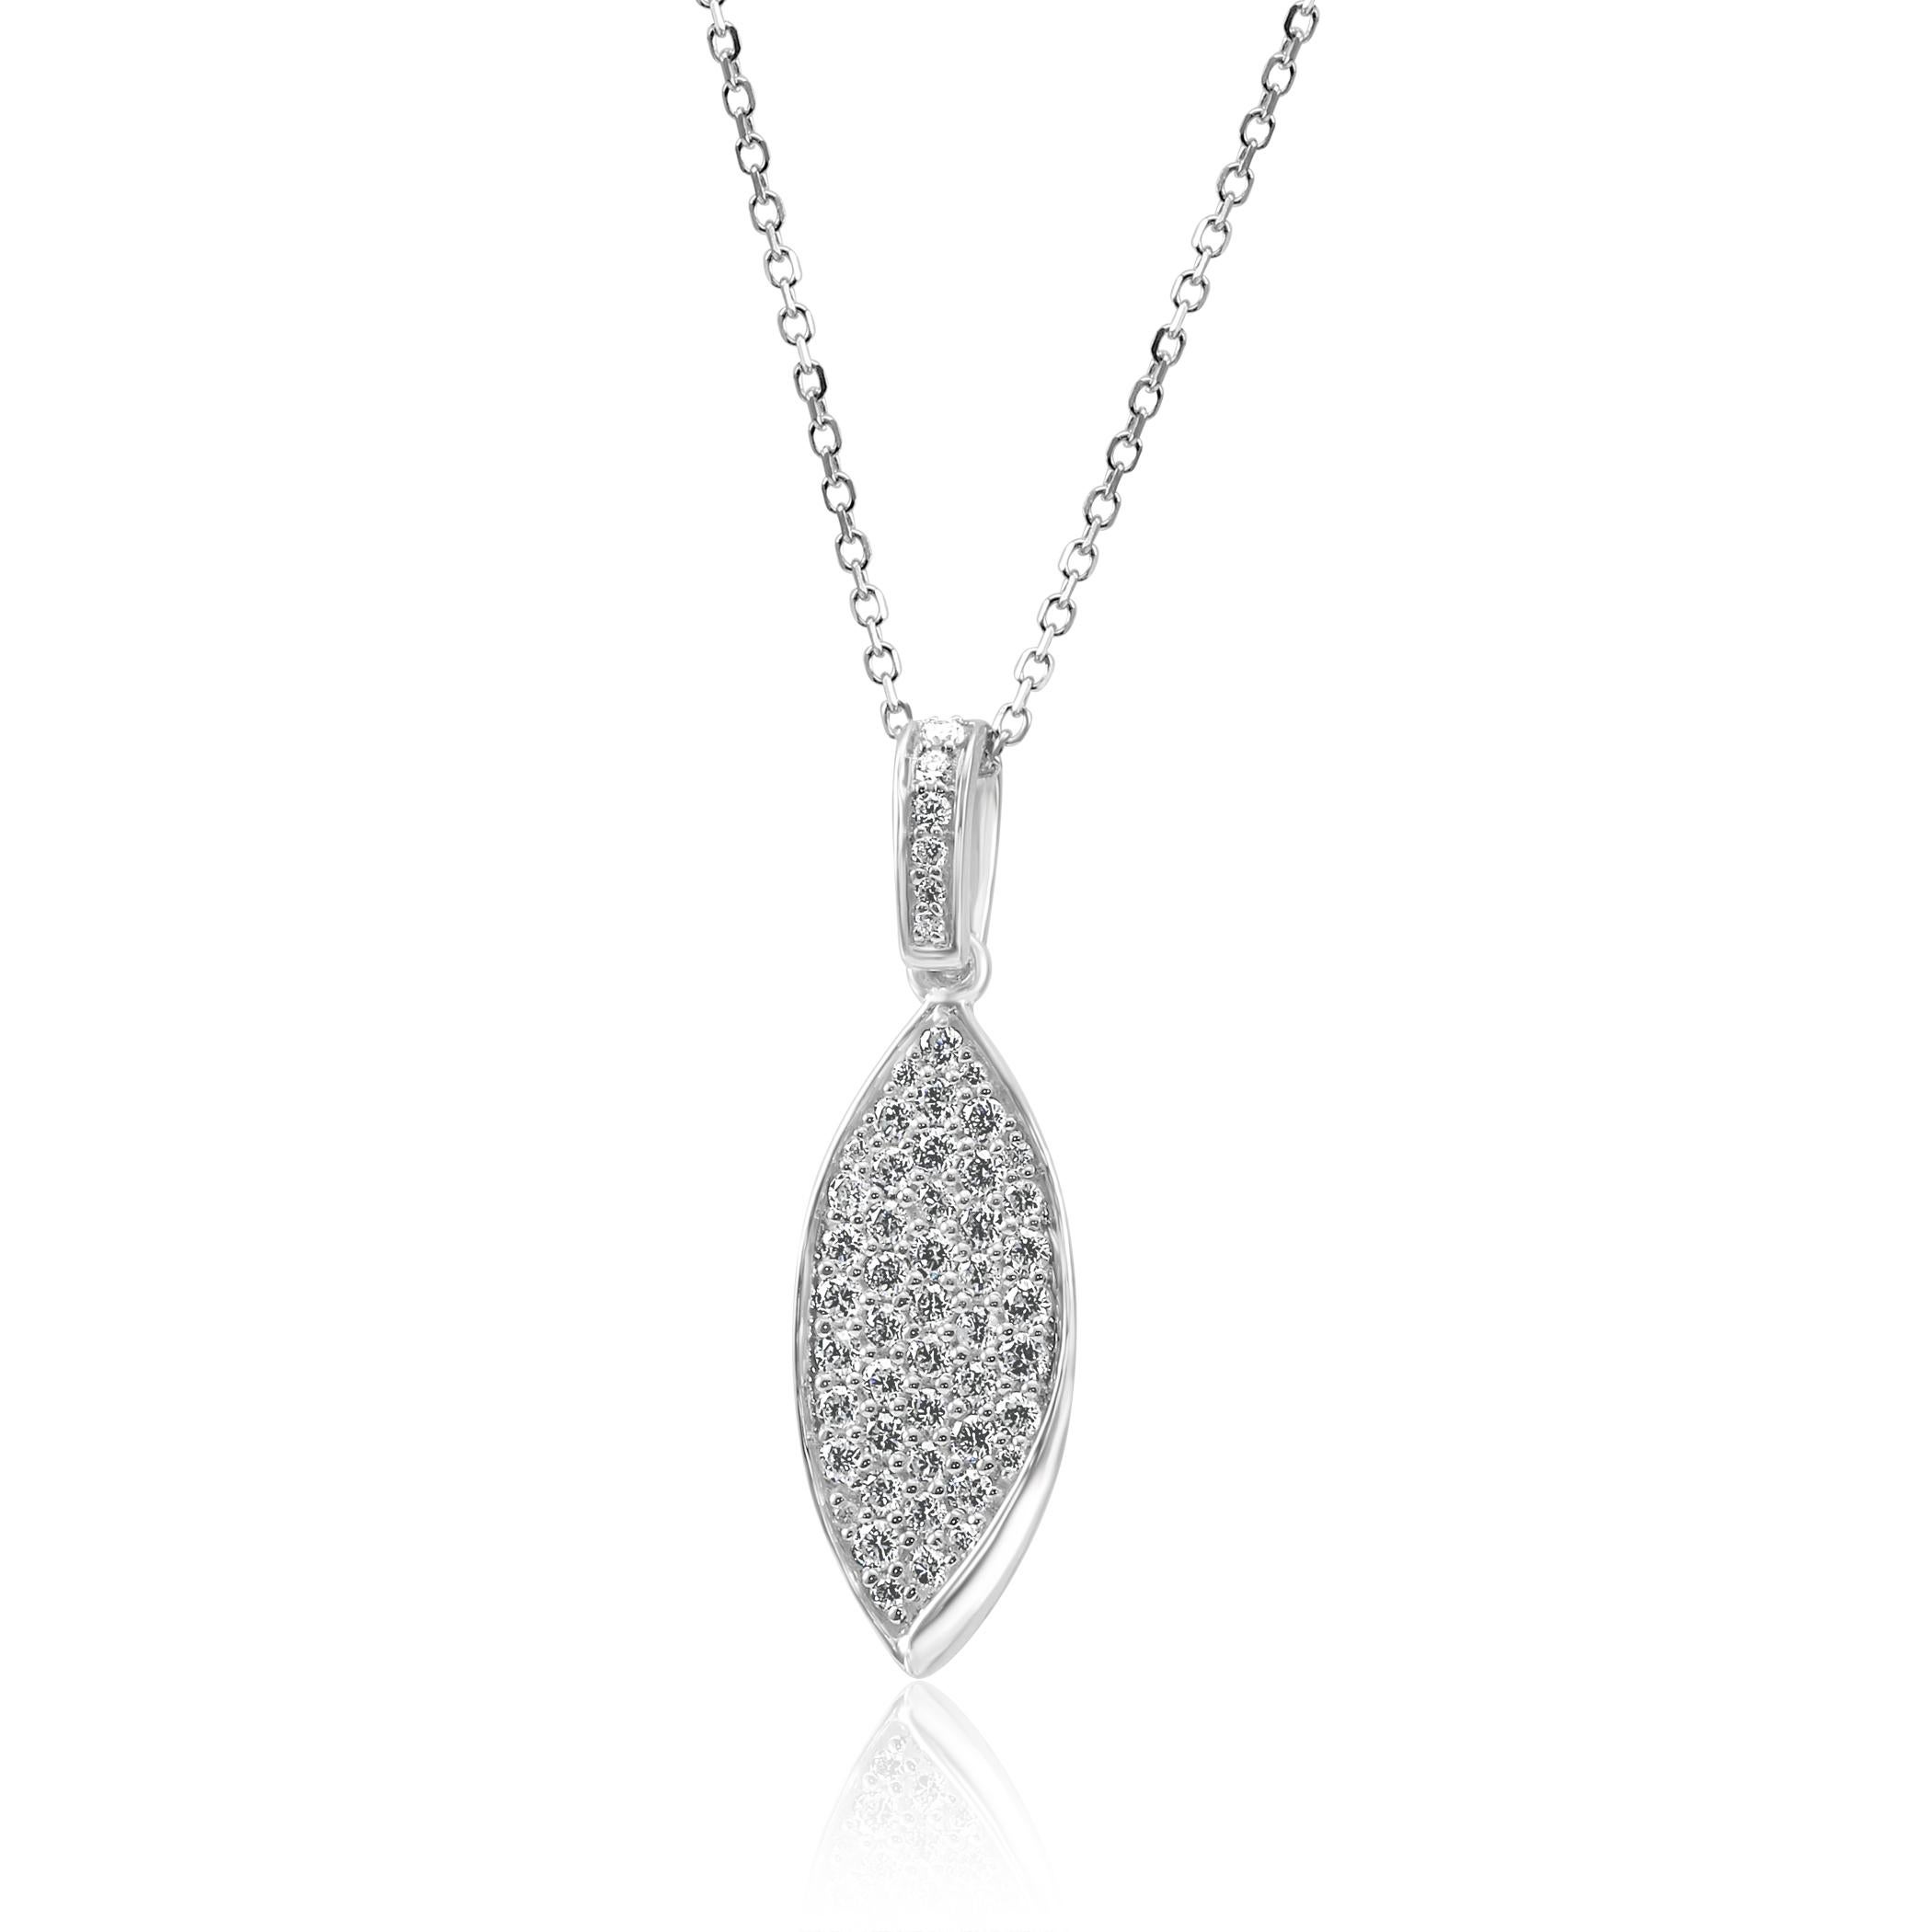 53 White Colorless Diamond Round SI clarity 0.45 Carat set in 14K White Gold Leaf Style Fashion Drop Dangle Pendant Chain Necklace.

Total Diamond Weight 0.45 Carat

Style available in different price ranges and with different center stones in all